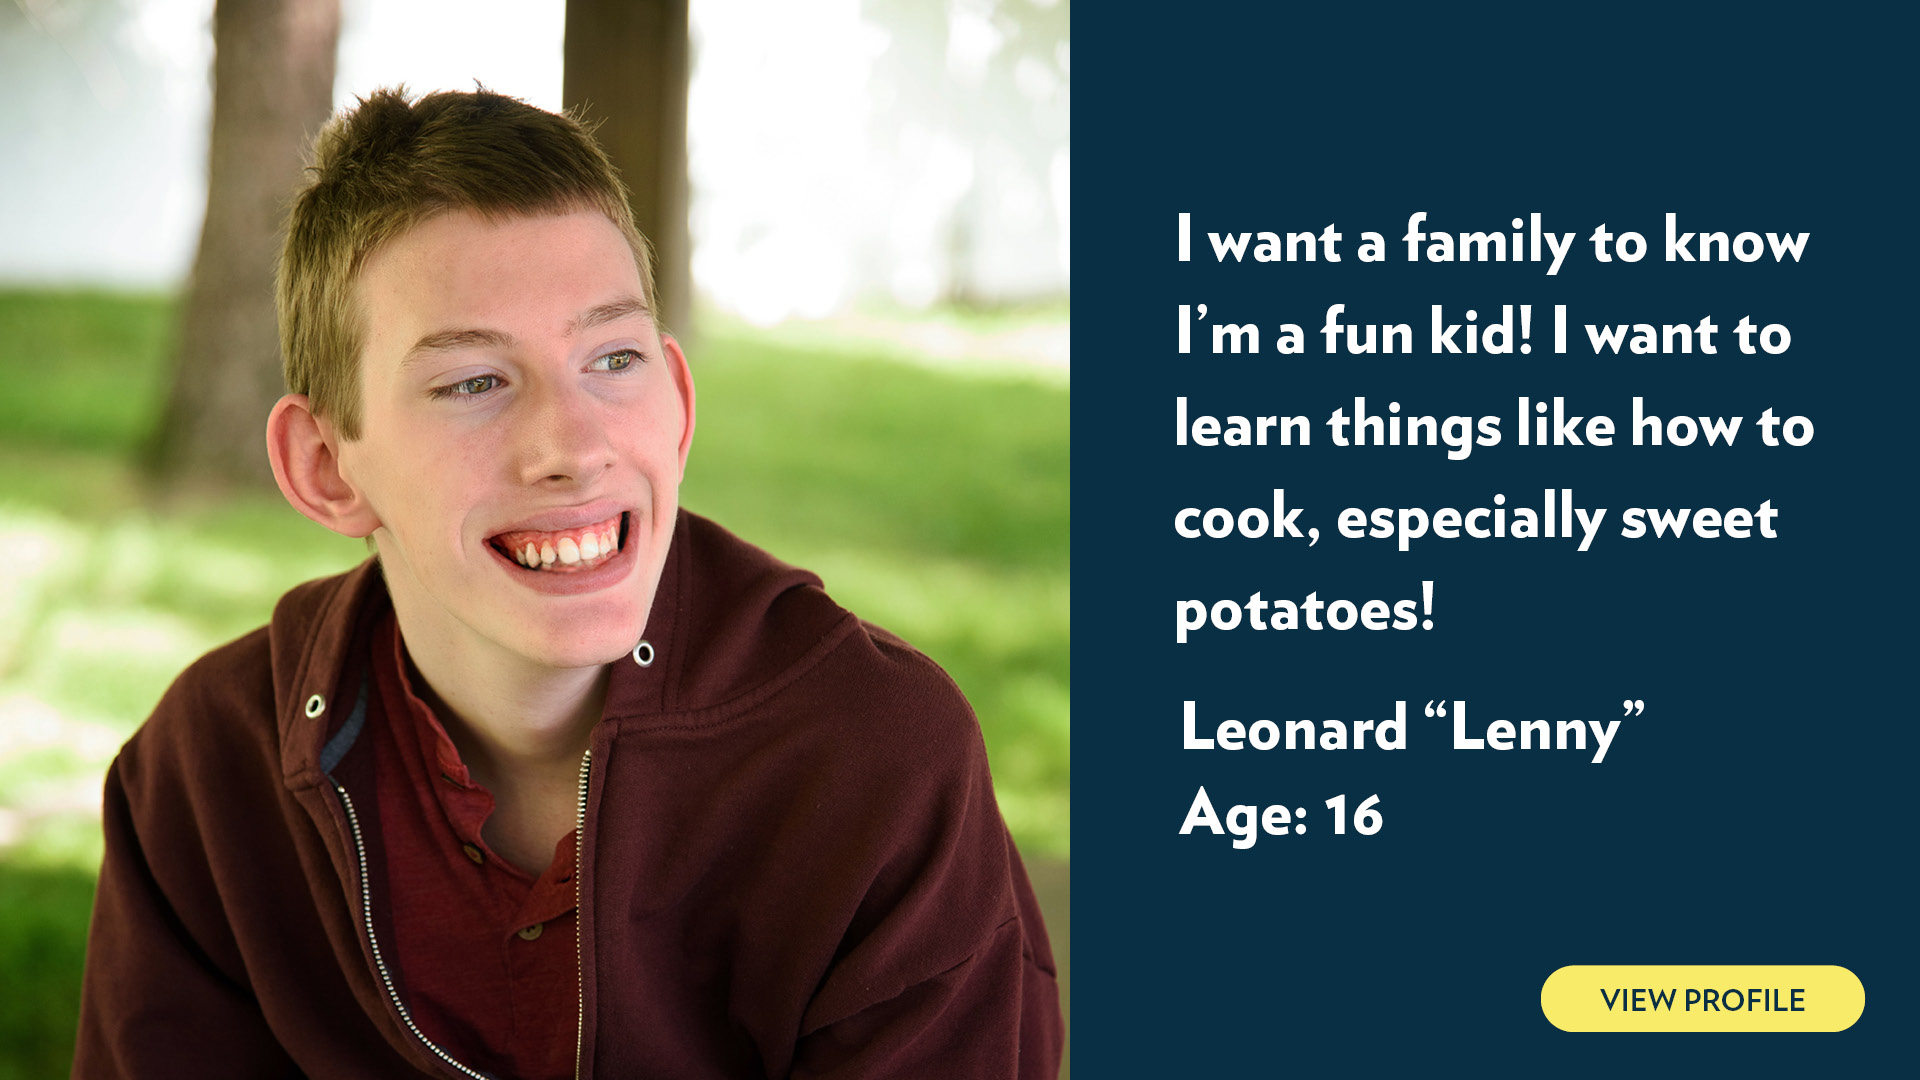 Leonard (Lenny), age 16. I want a family to know I’m a fun kid! I want to learn things like how to cook, especially sweet potatoes! View profile.